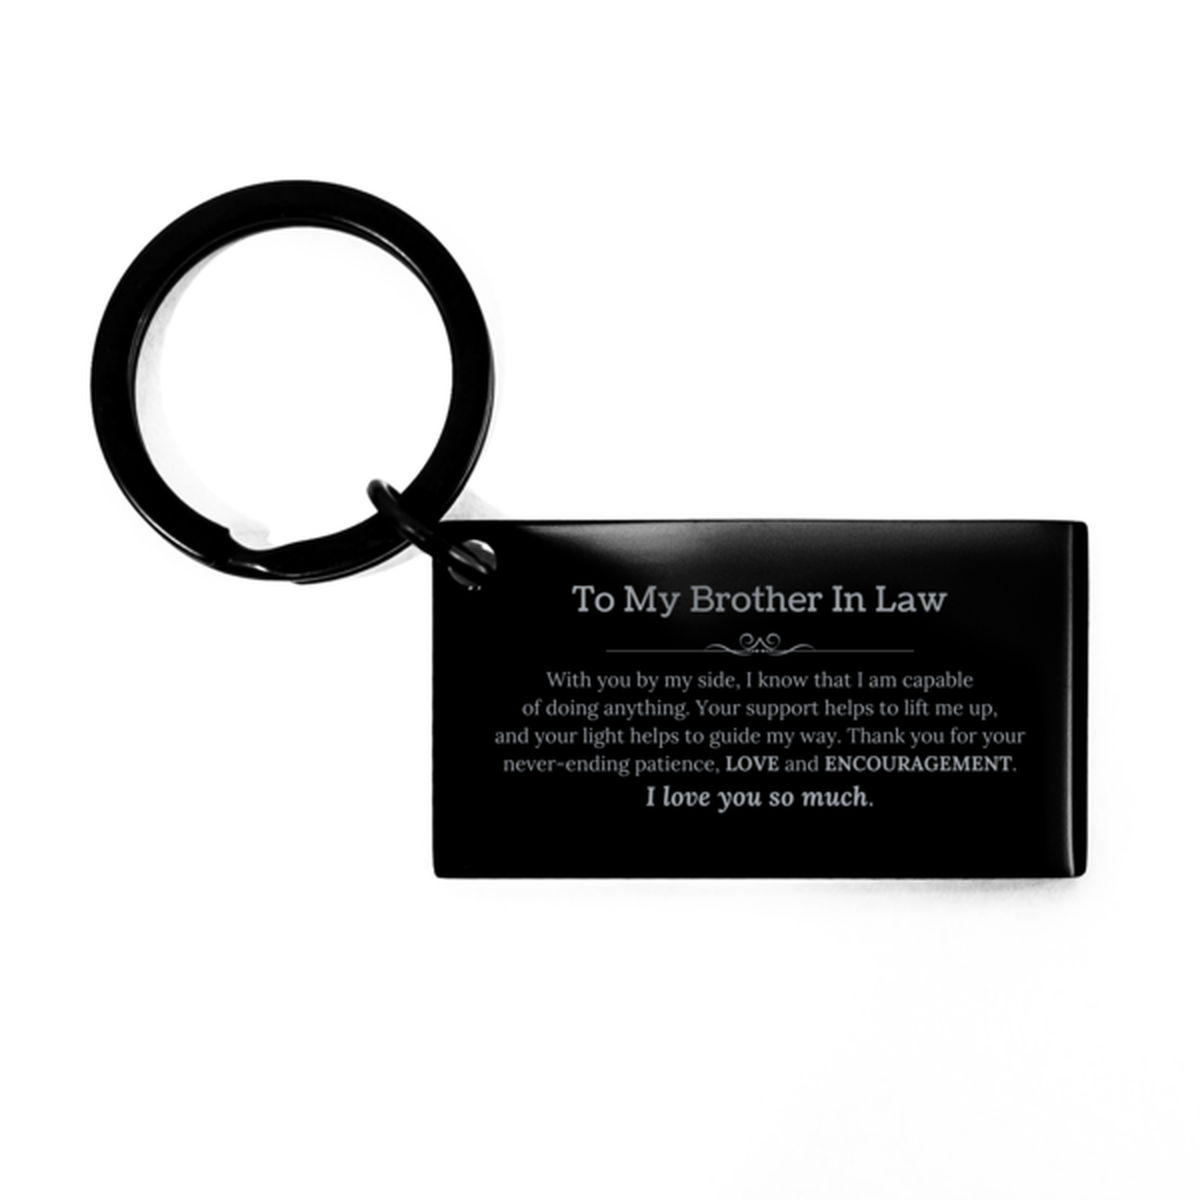 Appreciation Brother In Law Keychain Gifts, To My Brother In Law Birthday Christmas Wedding Keepsake Gifts for Brother In Law With you by my side, I know that I am capable of doing anything. I love you so much